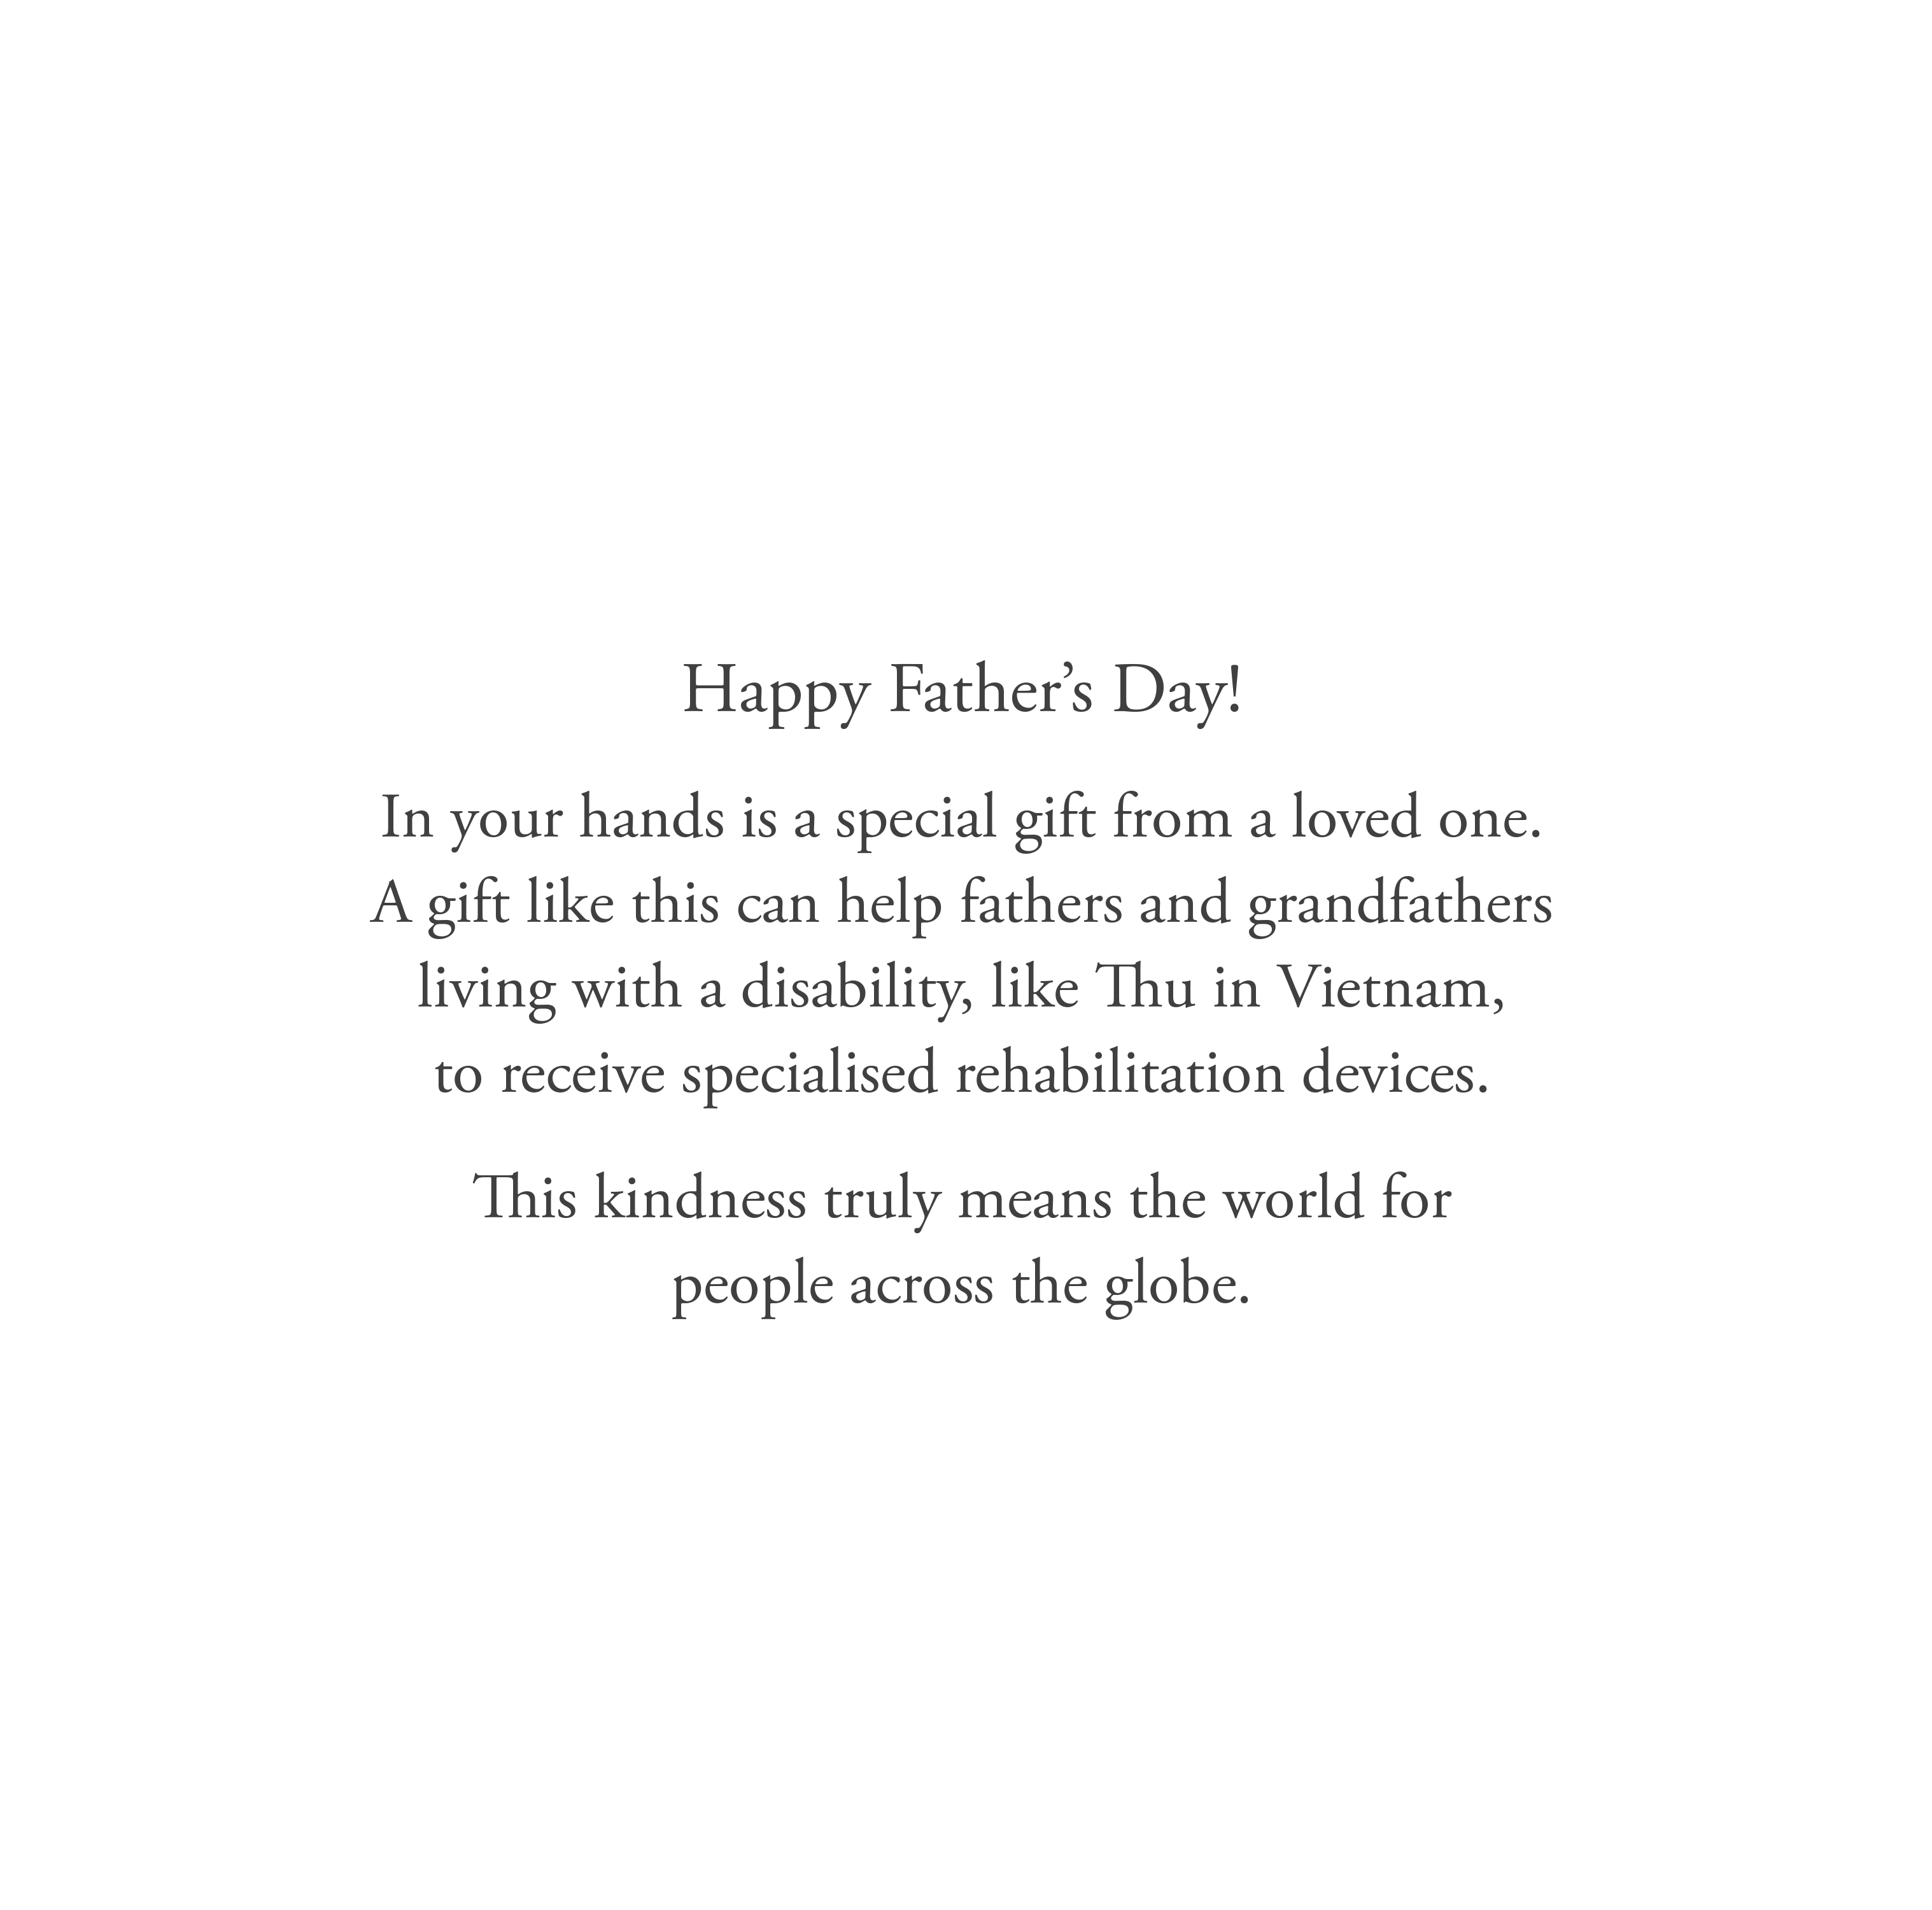 Father's Day Card 1 Text